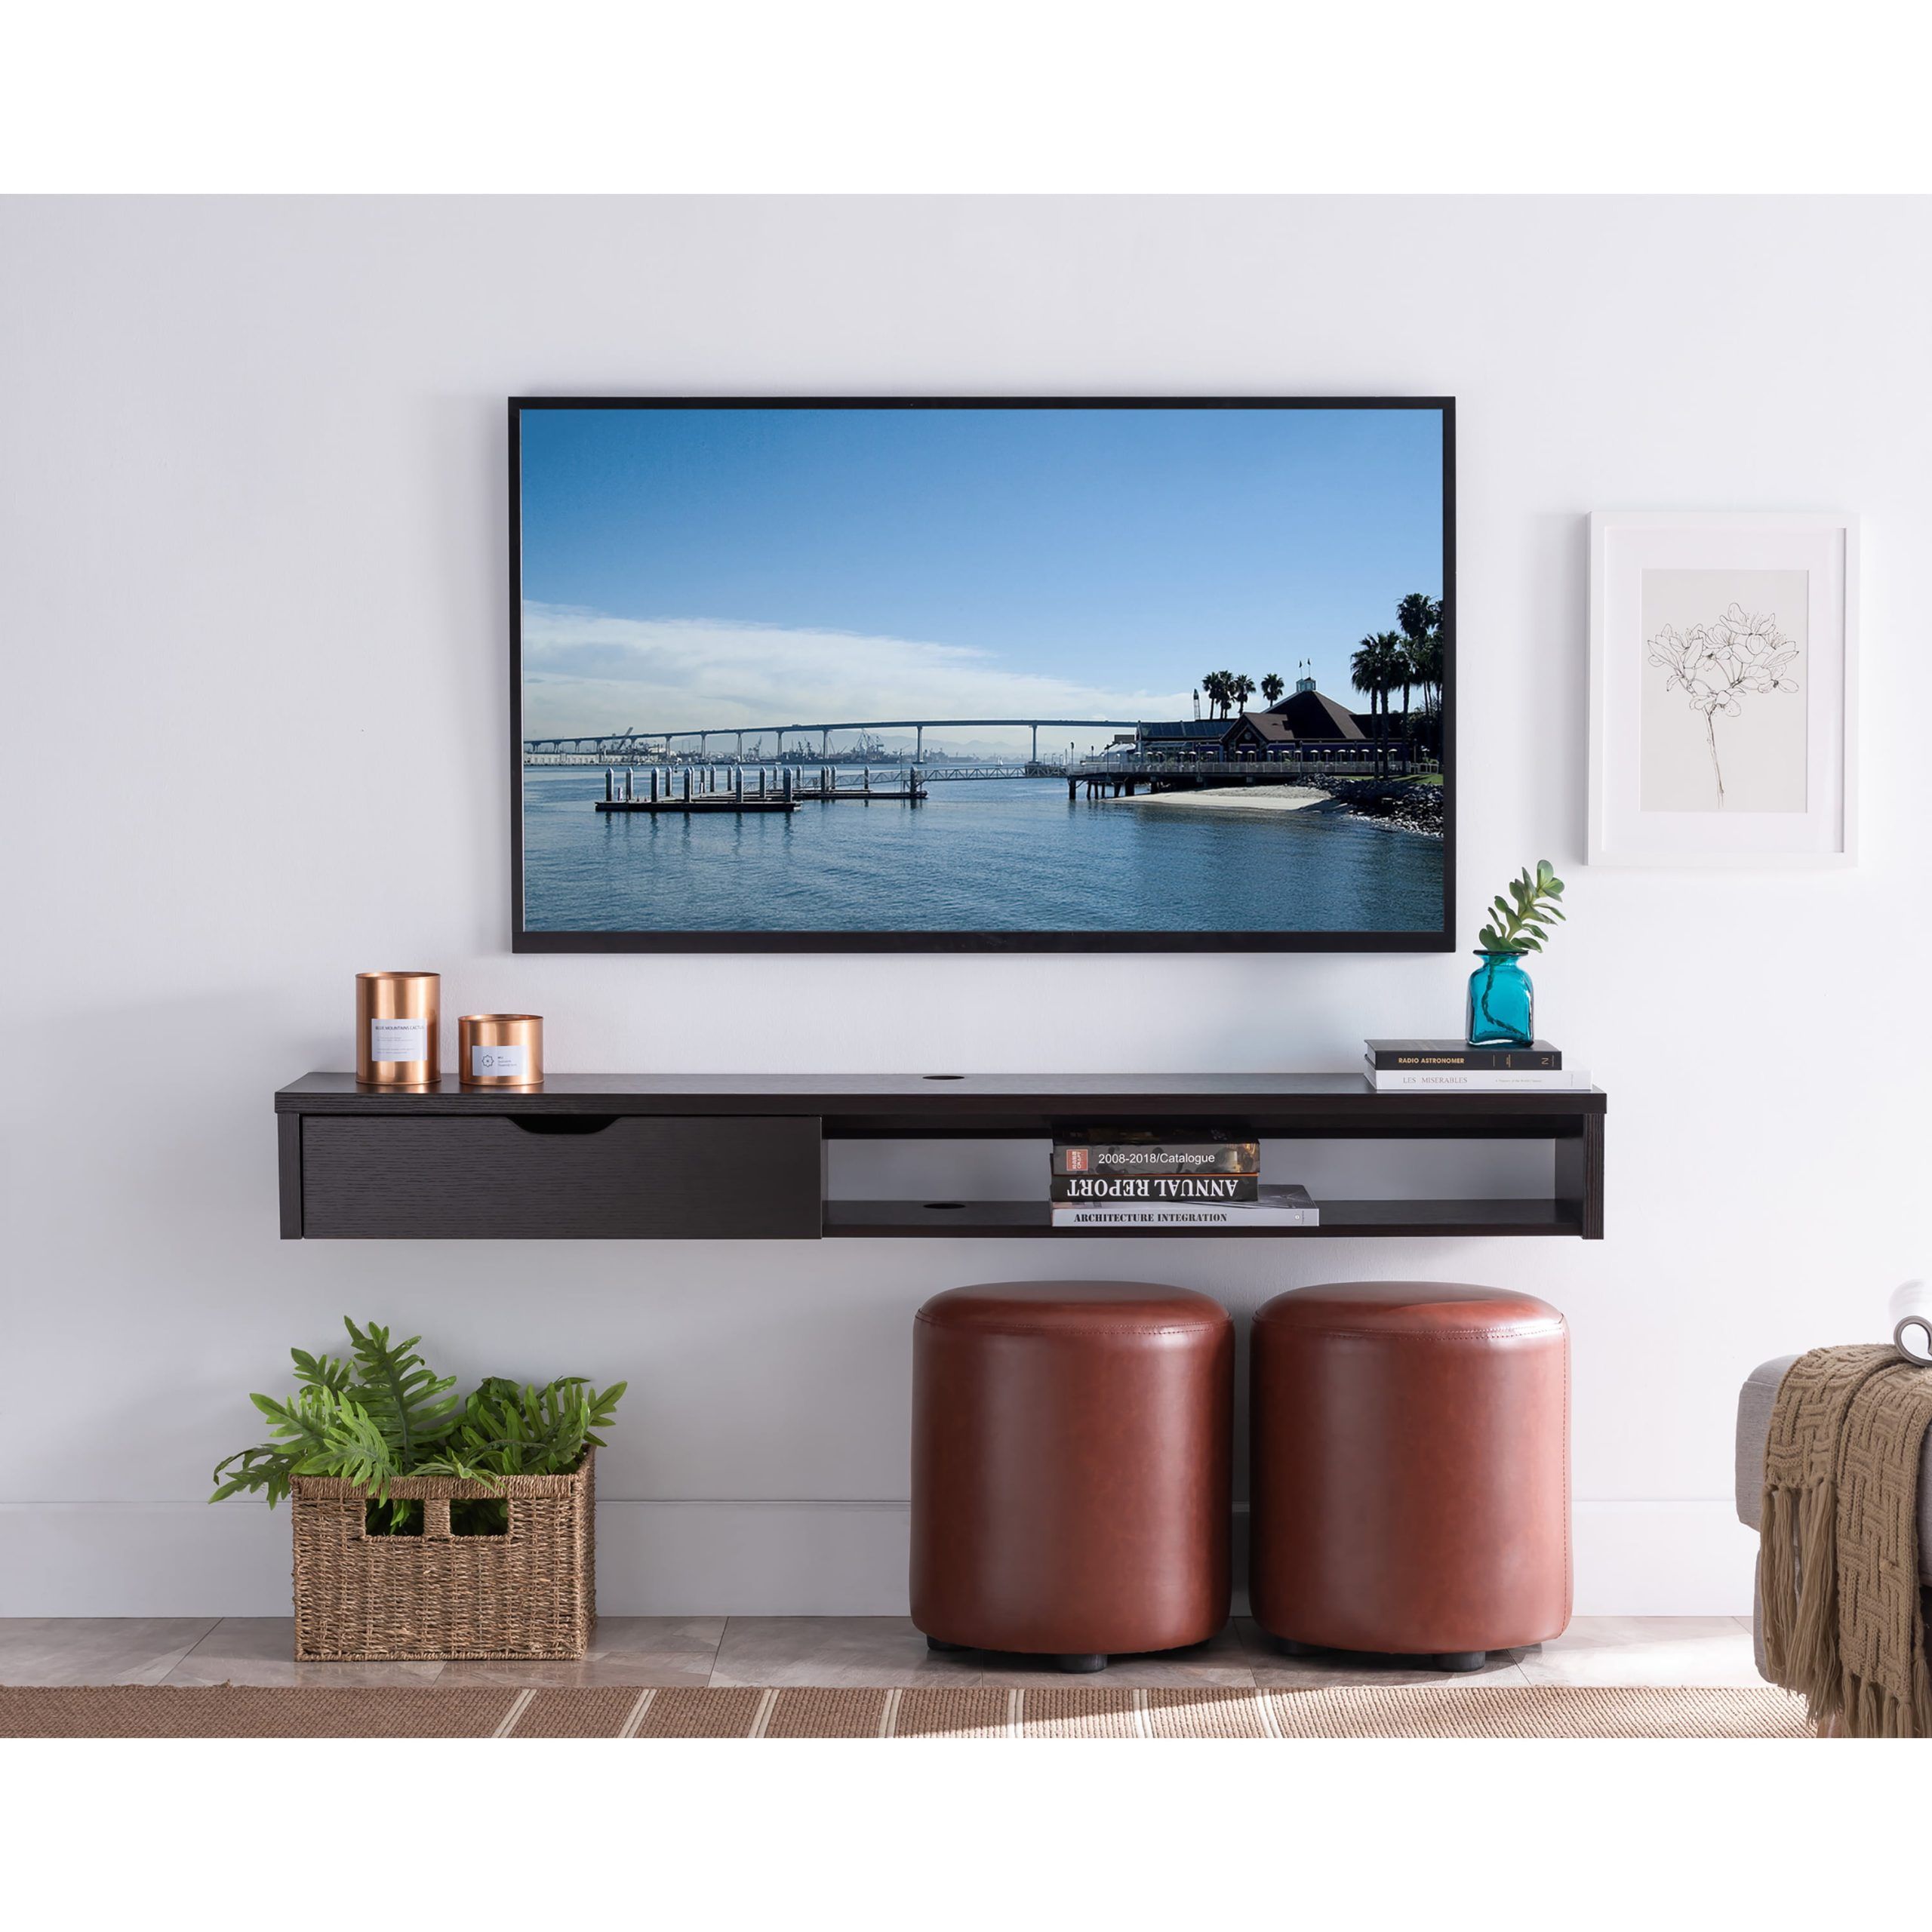 Furniture Of America Eponine Multi Storage Floating Tv Stand Throughout Floating Stands For Tvs (View 2 of 20)